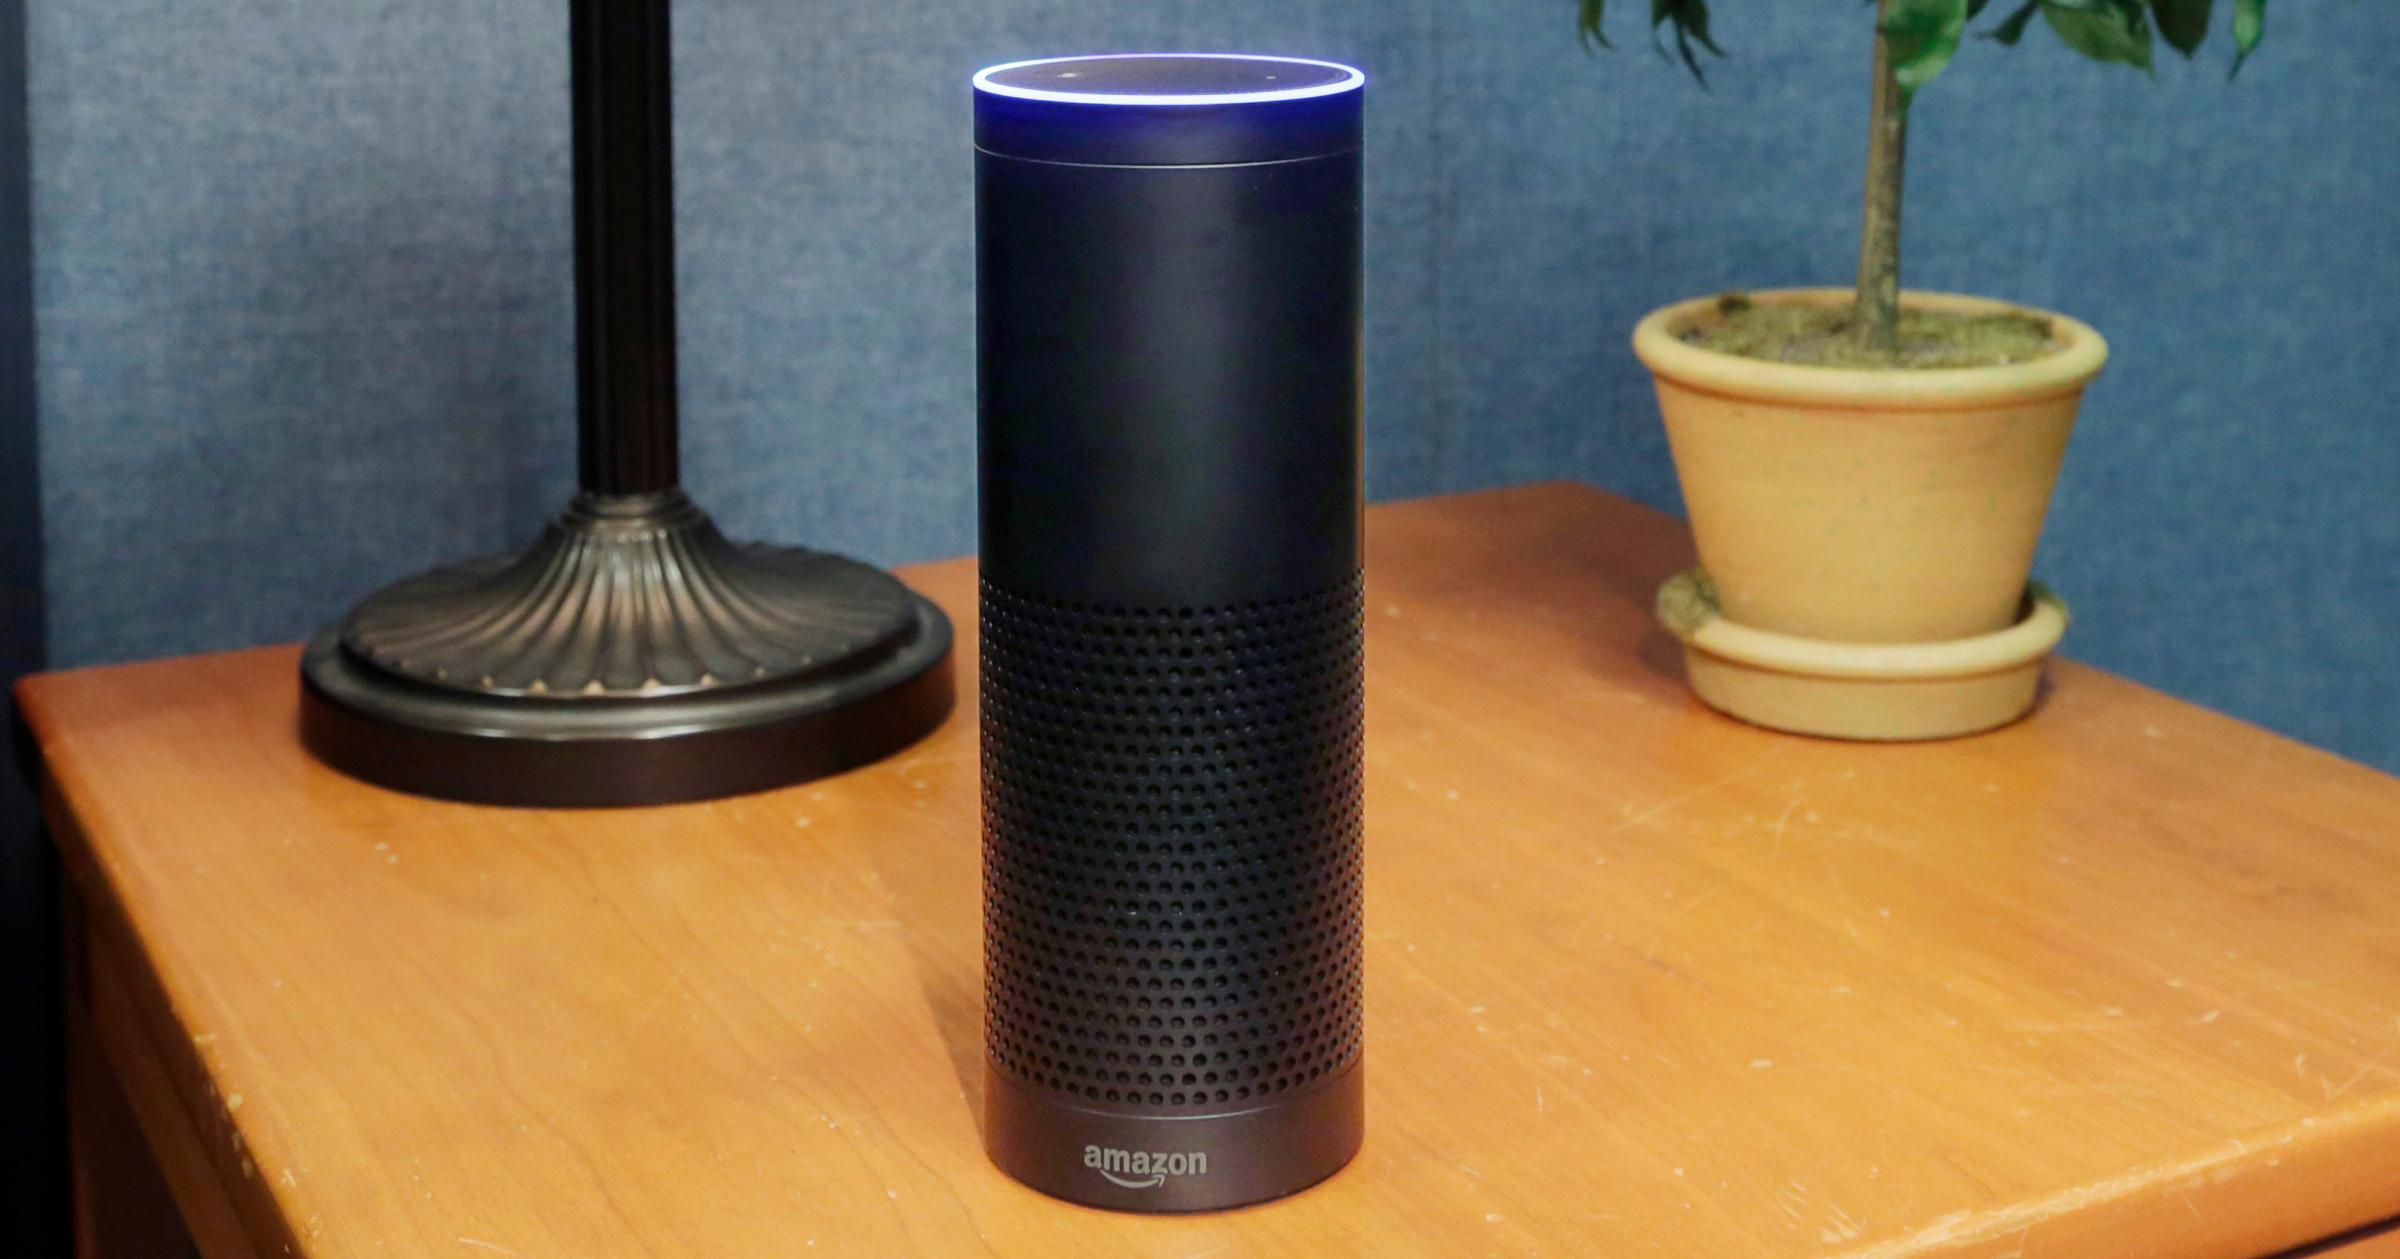 Amazon's Echo is seen on July 29, 2015 in New York City.